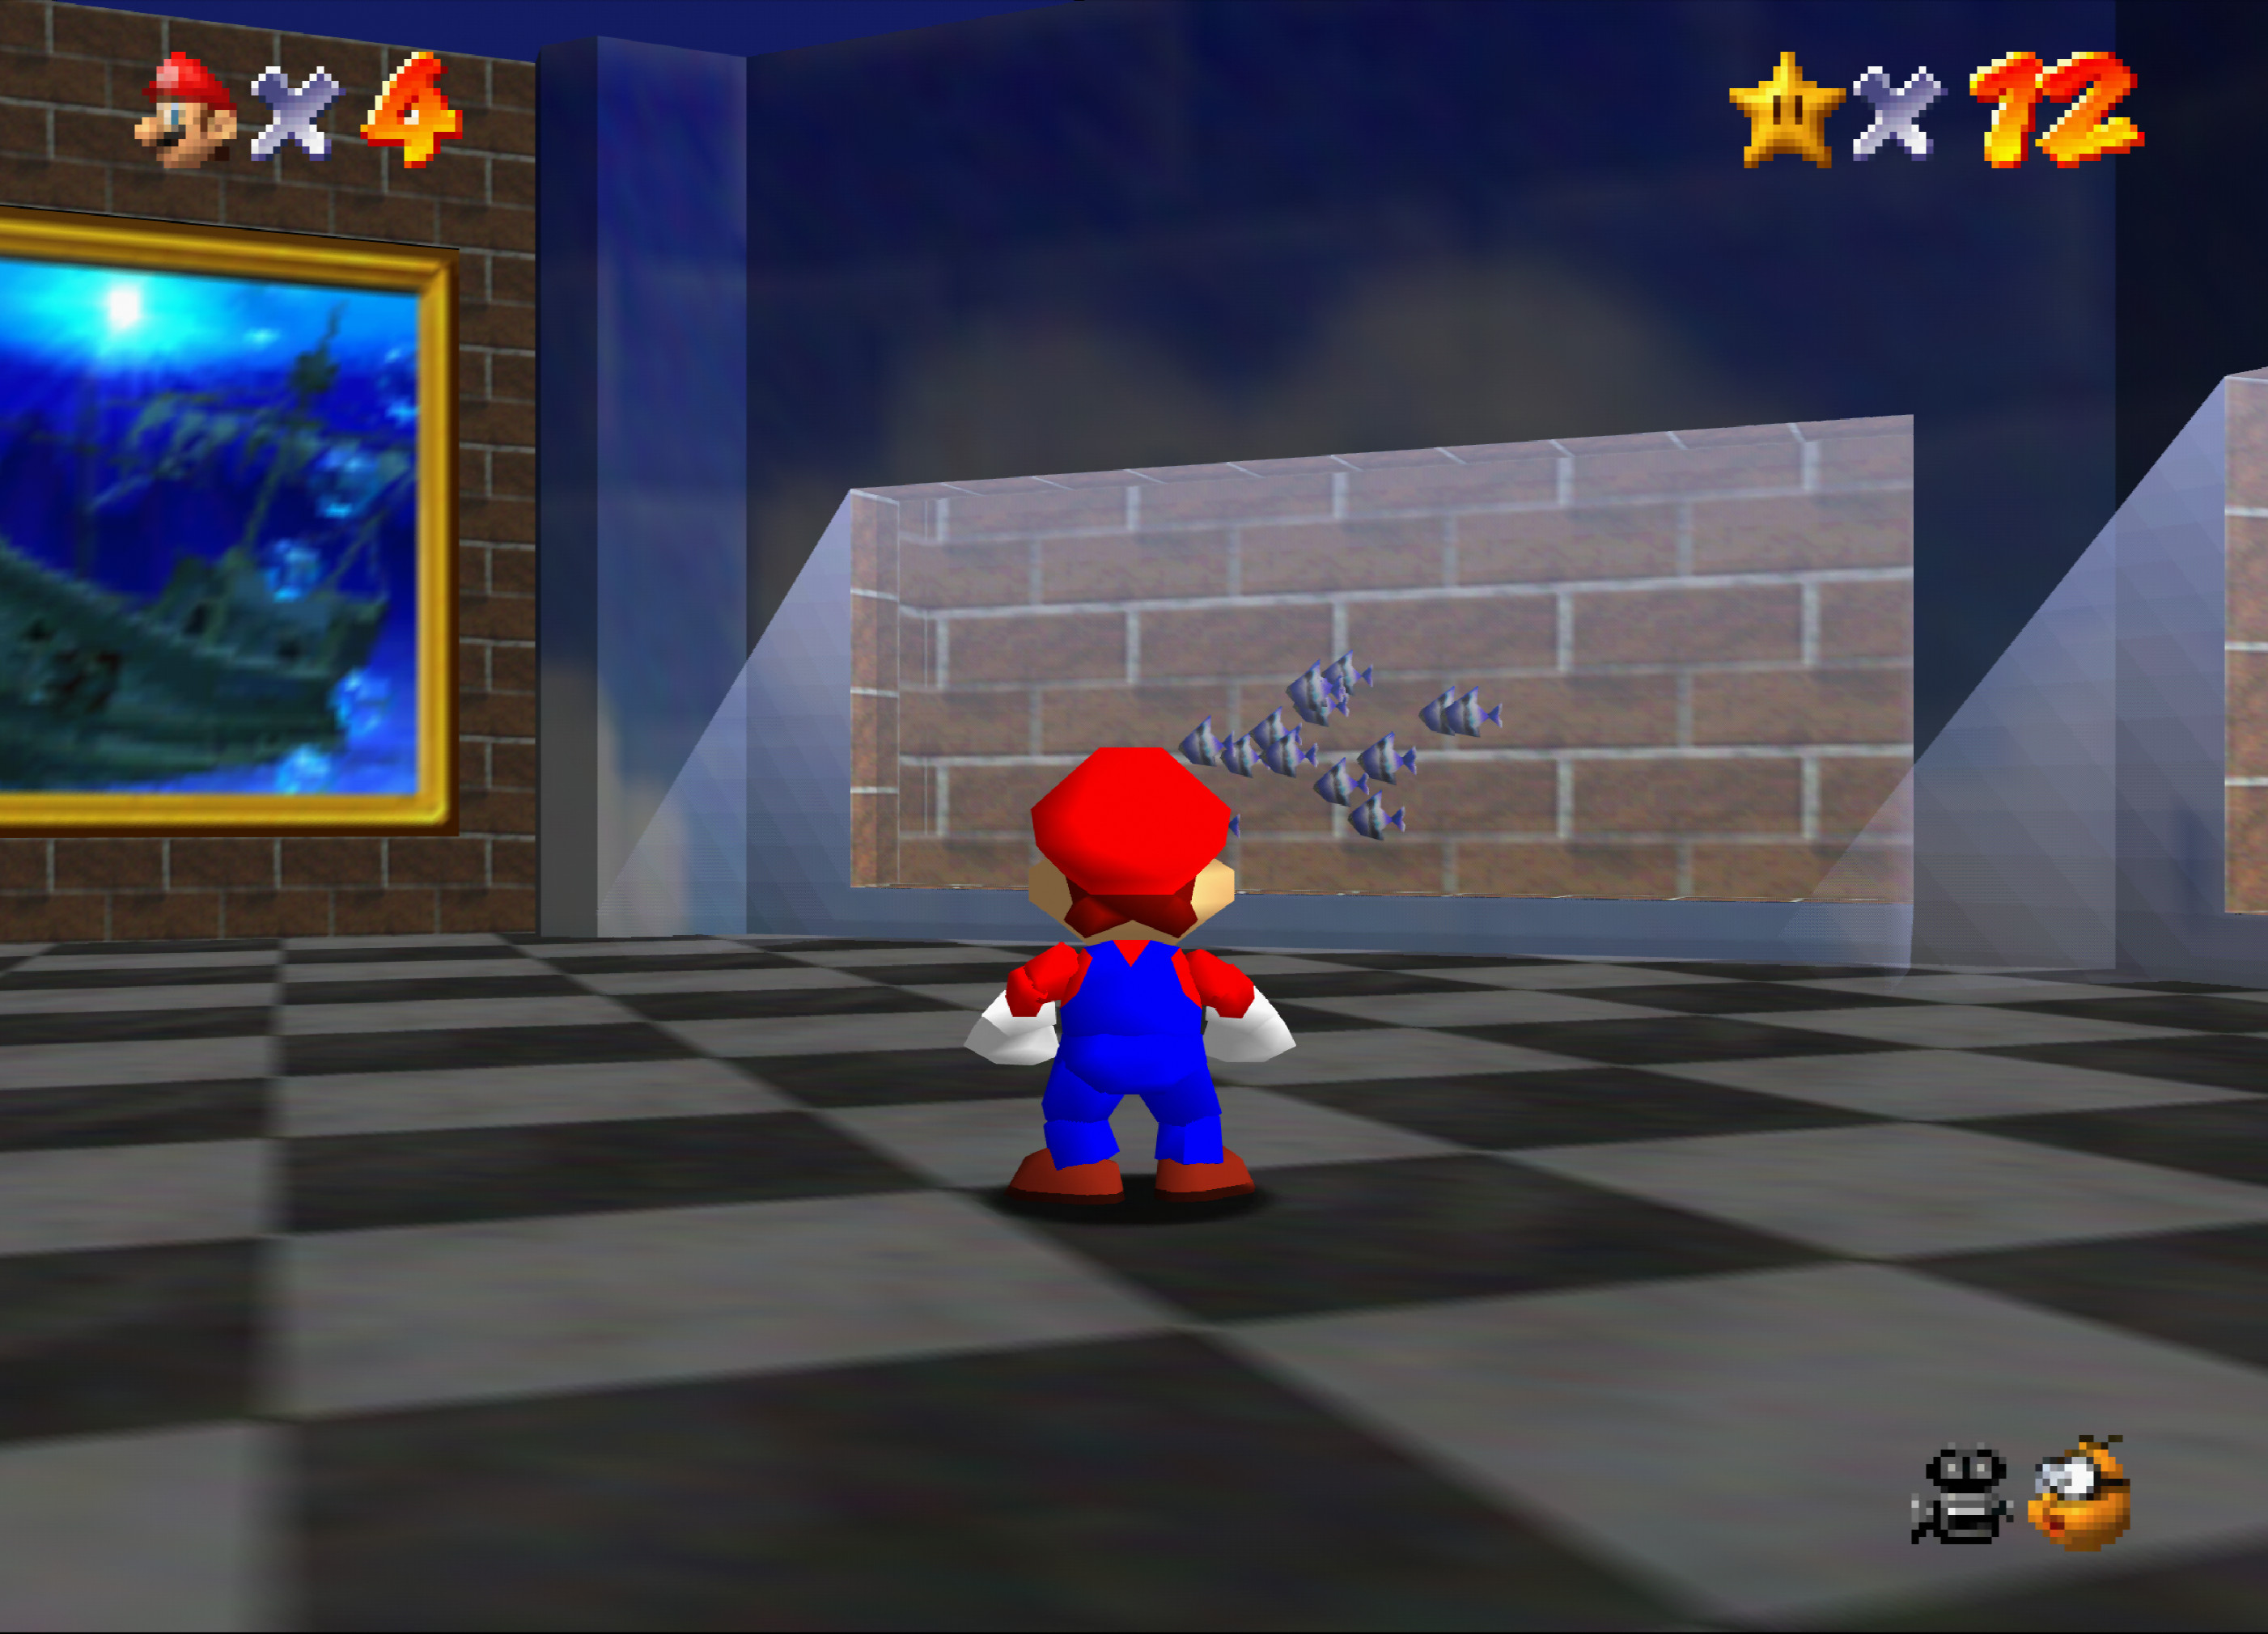 Super Mario 64 running on ParaLLEl RDP with 8x internal upscale